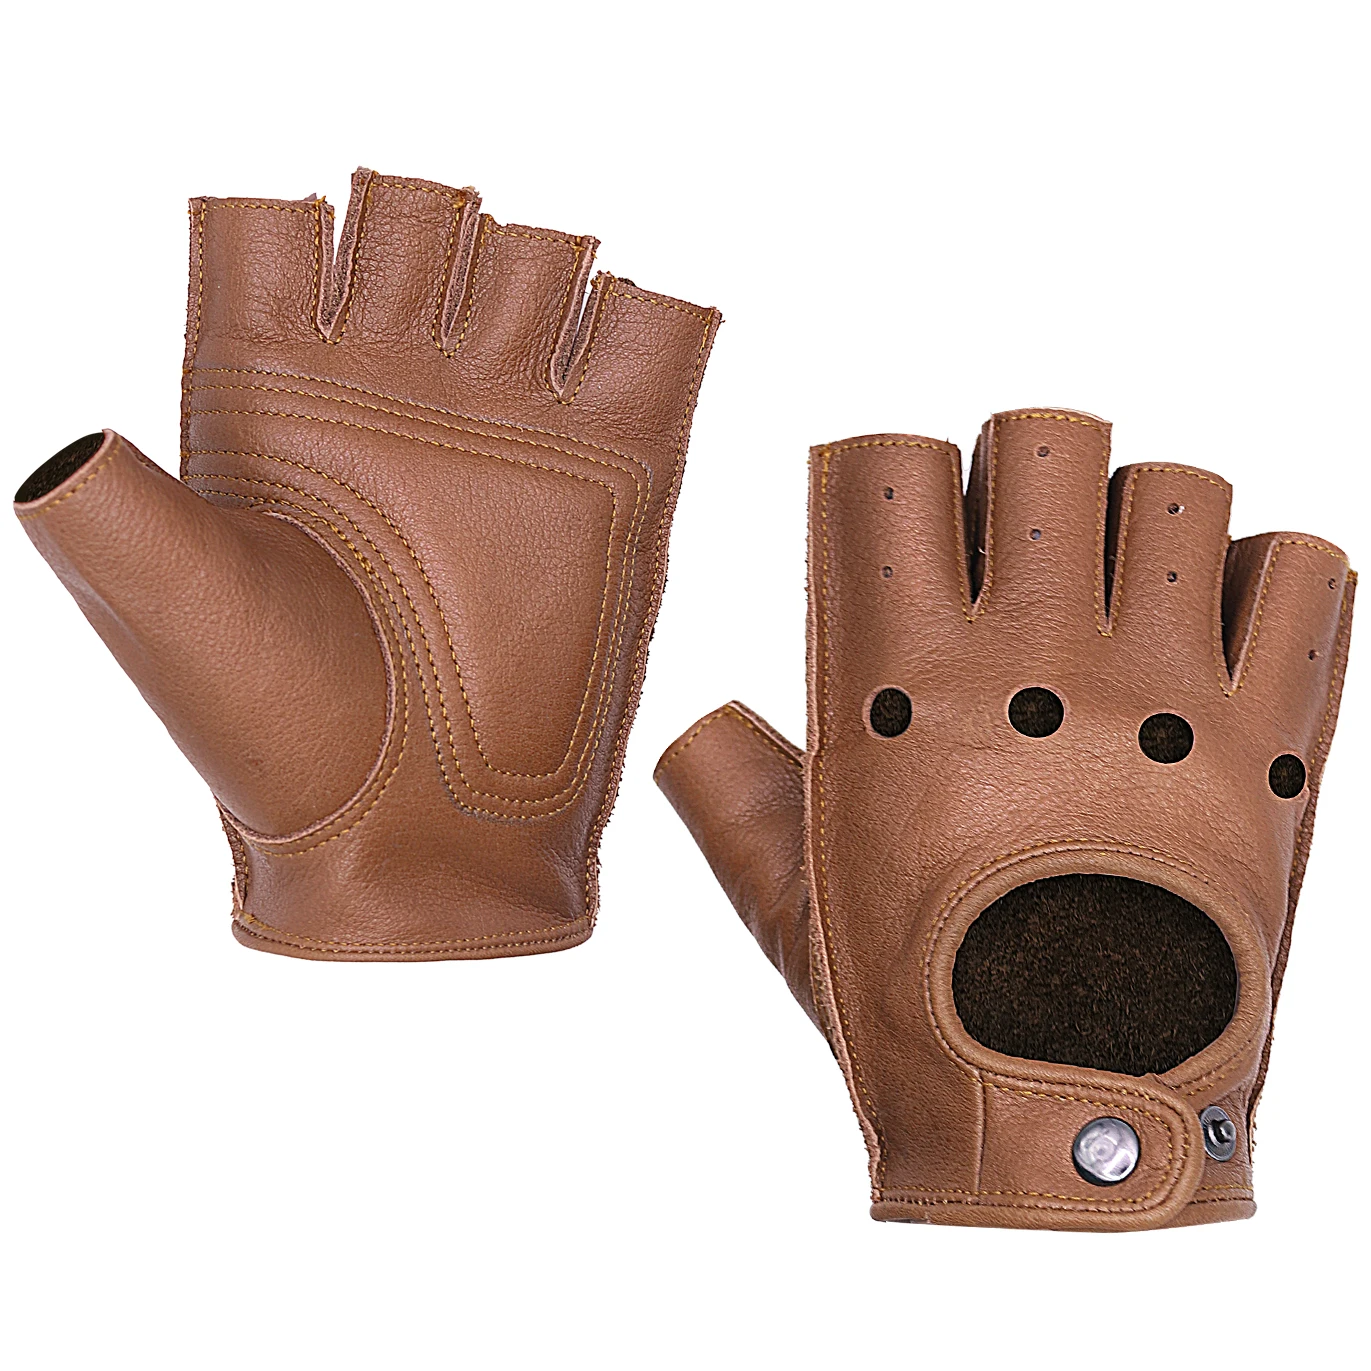 Mens+Brown+Leather+Finger+Less+Driving+Motorcycle+Biker+Gloves+Work+out+Exercise  for sale online